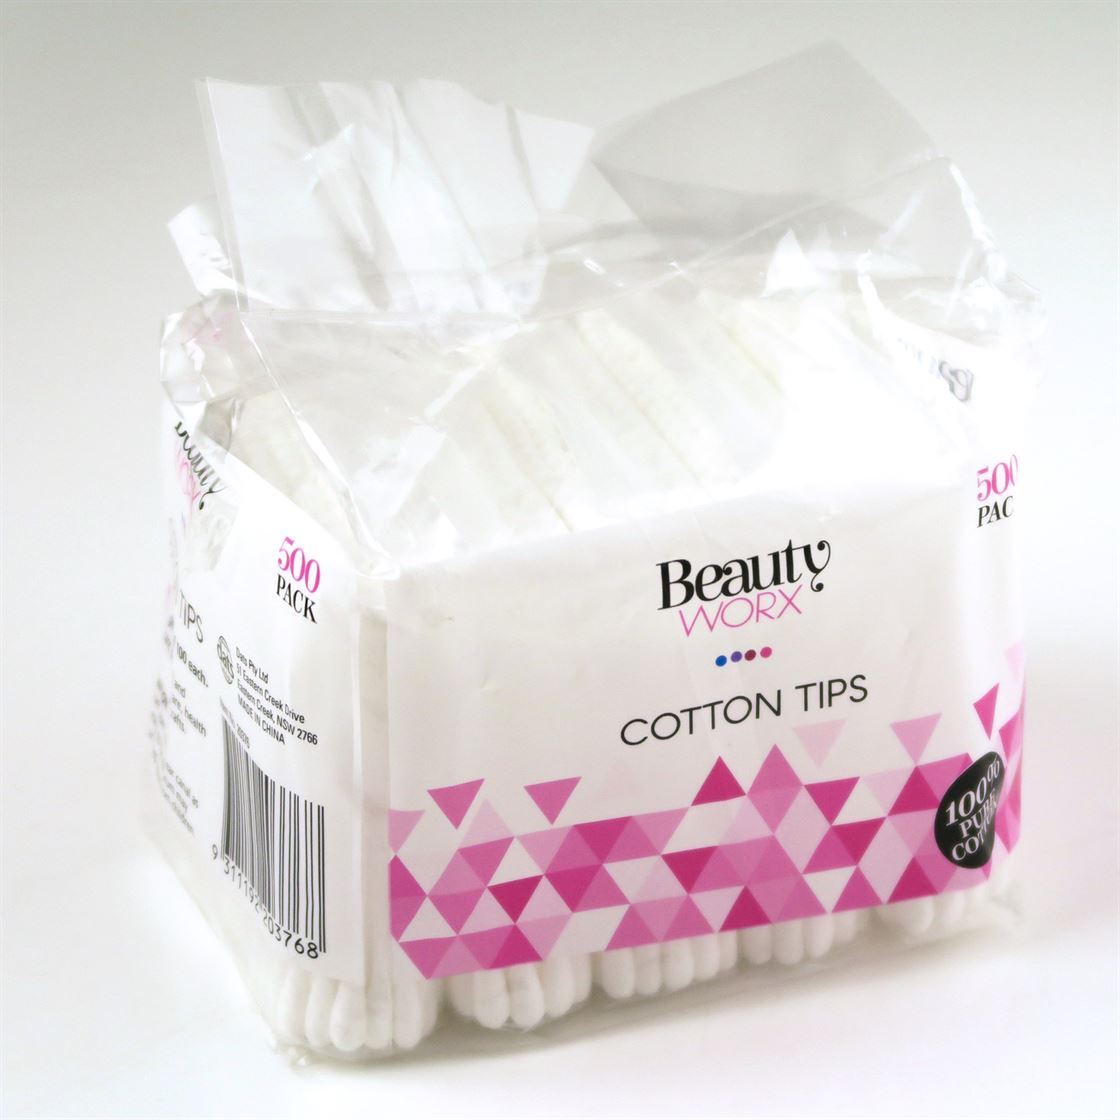 2 x Cotton Tips 100% Pure Cotton 500pk - Buy Personal Care ...